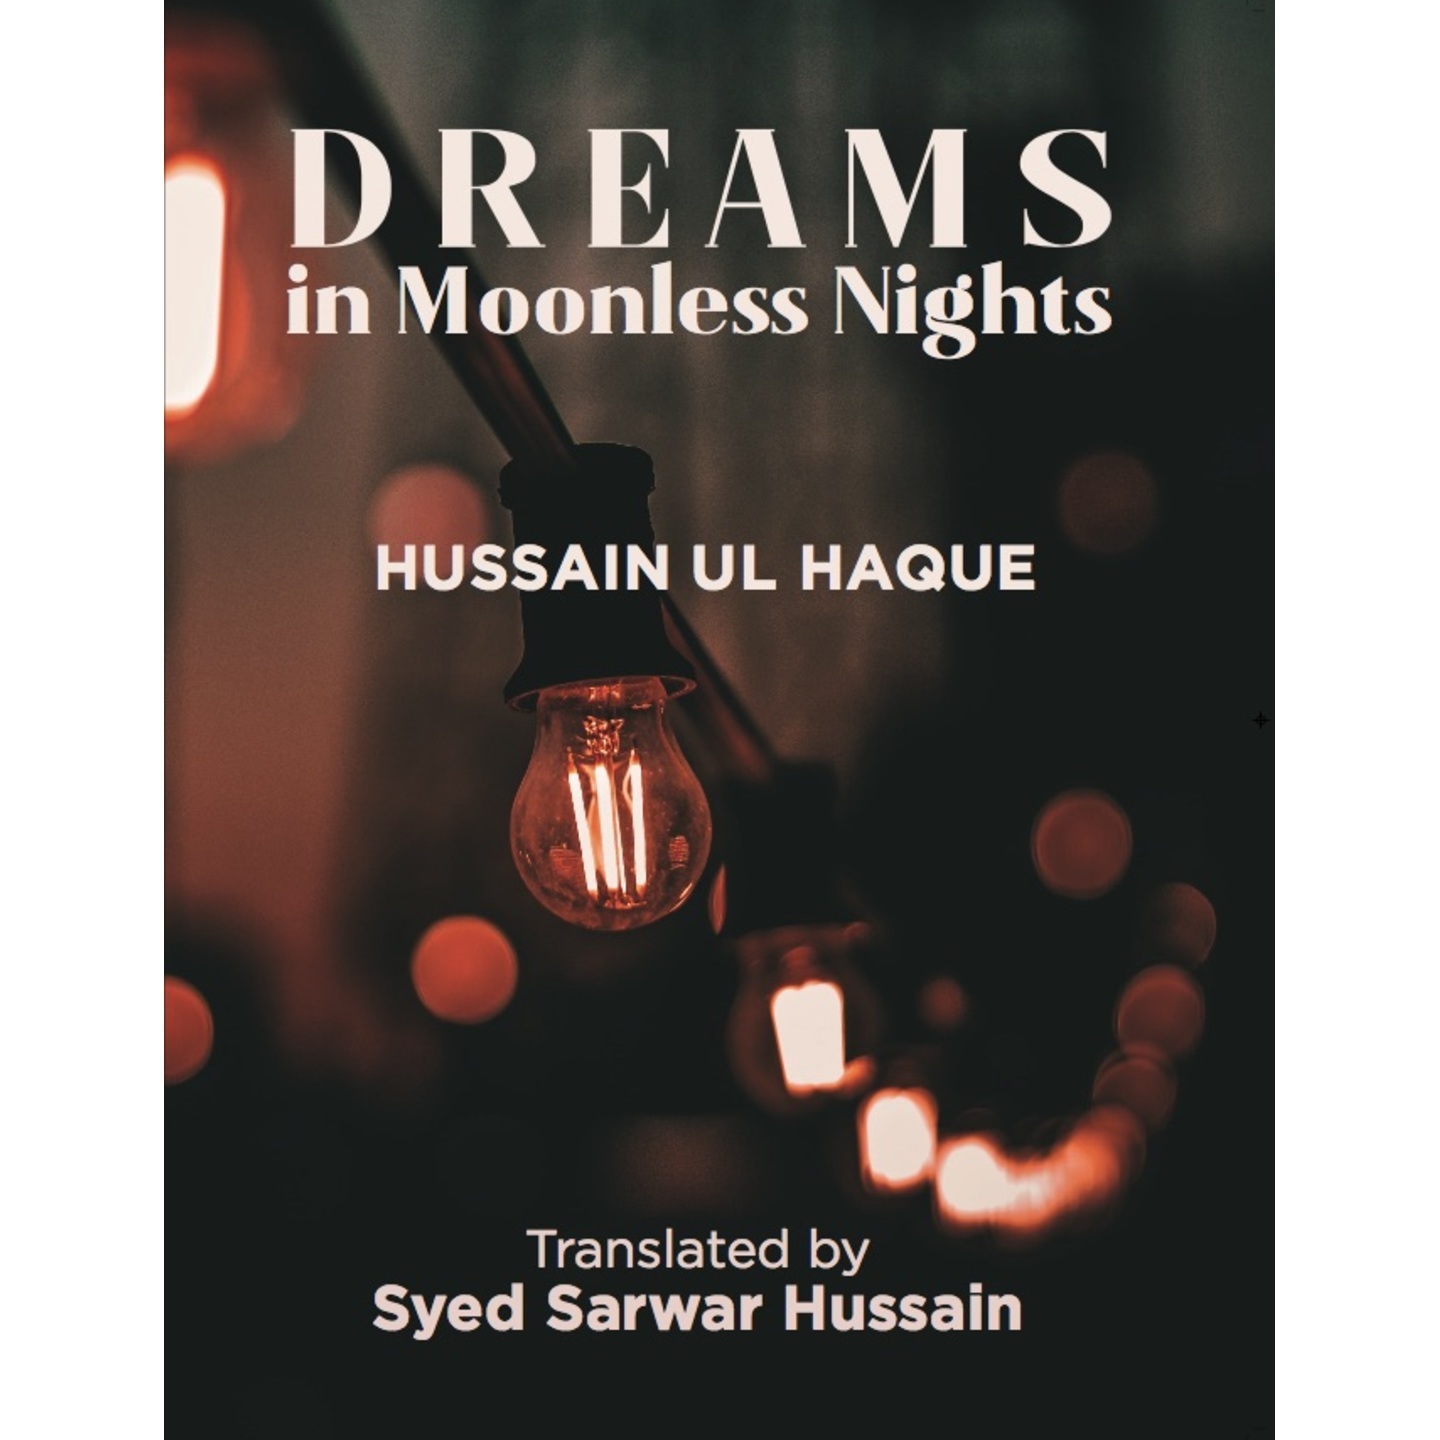 Dreams in Moonless Night by Hussain Ul Haque Eng. translation by Syed Sarwar Hussain